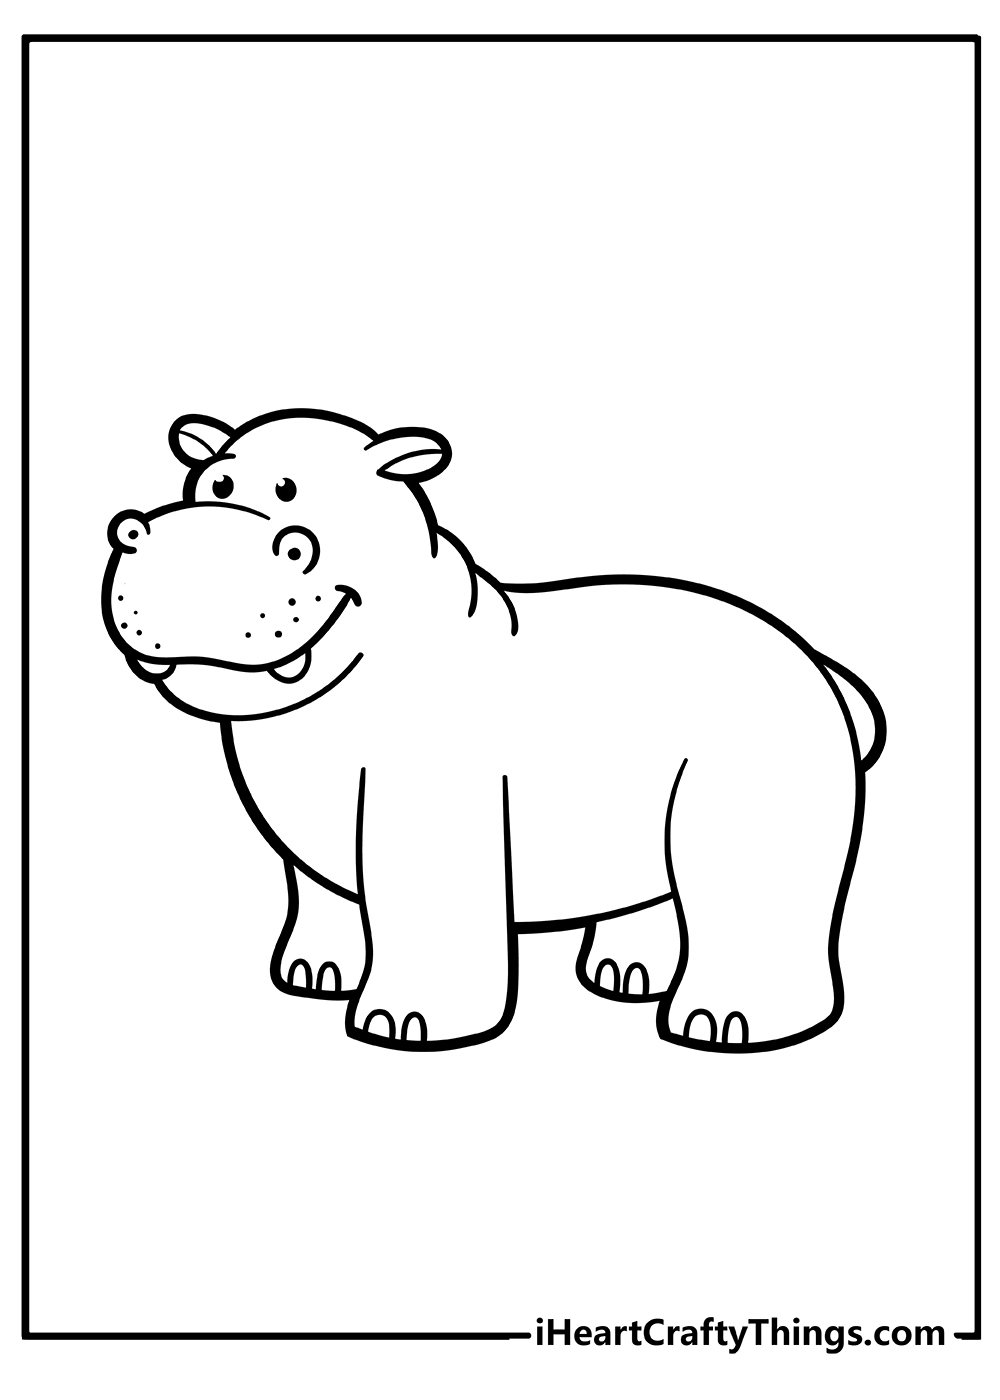 Hippo Coloring Pages for kids free download